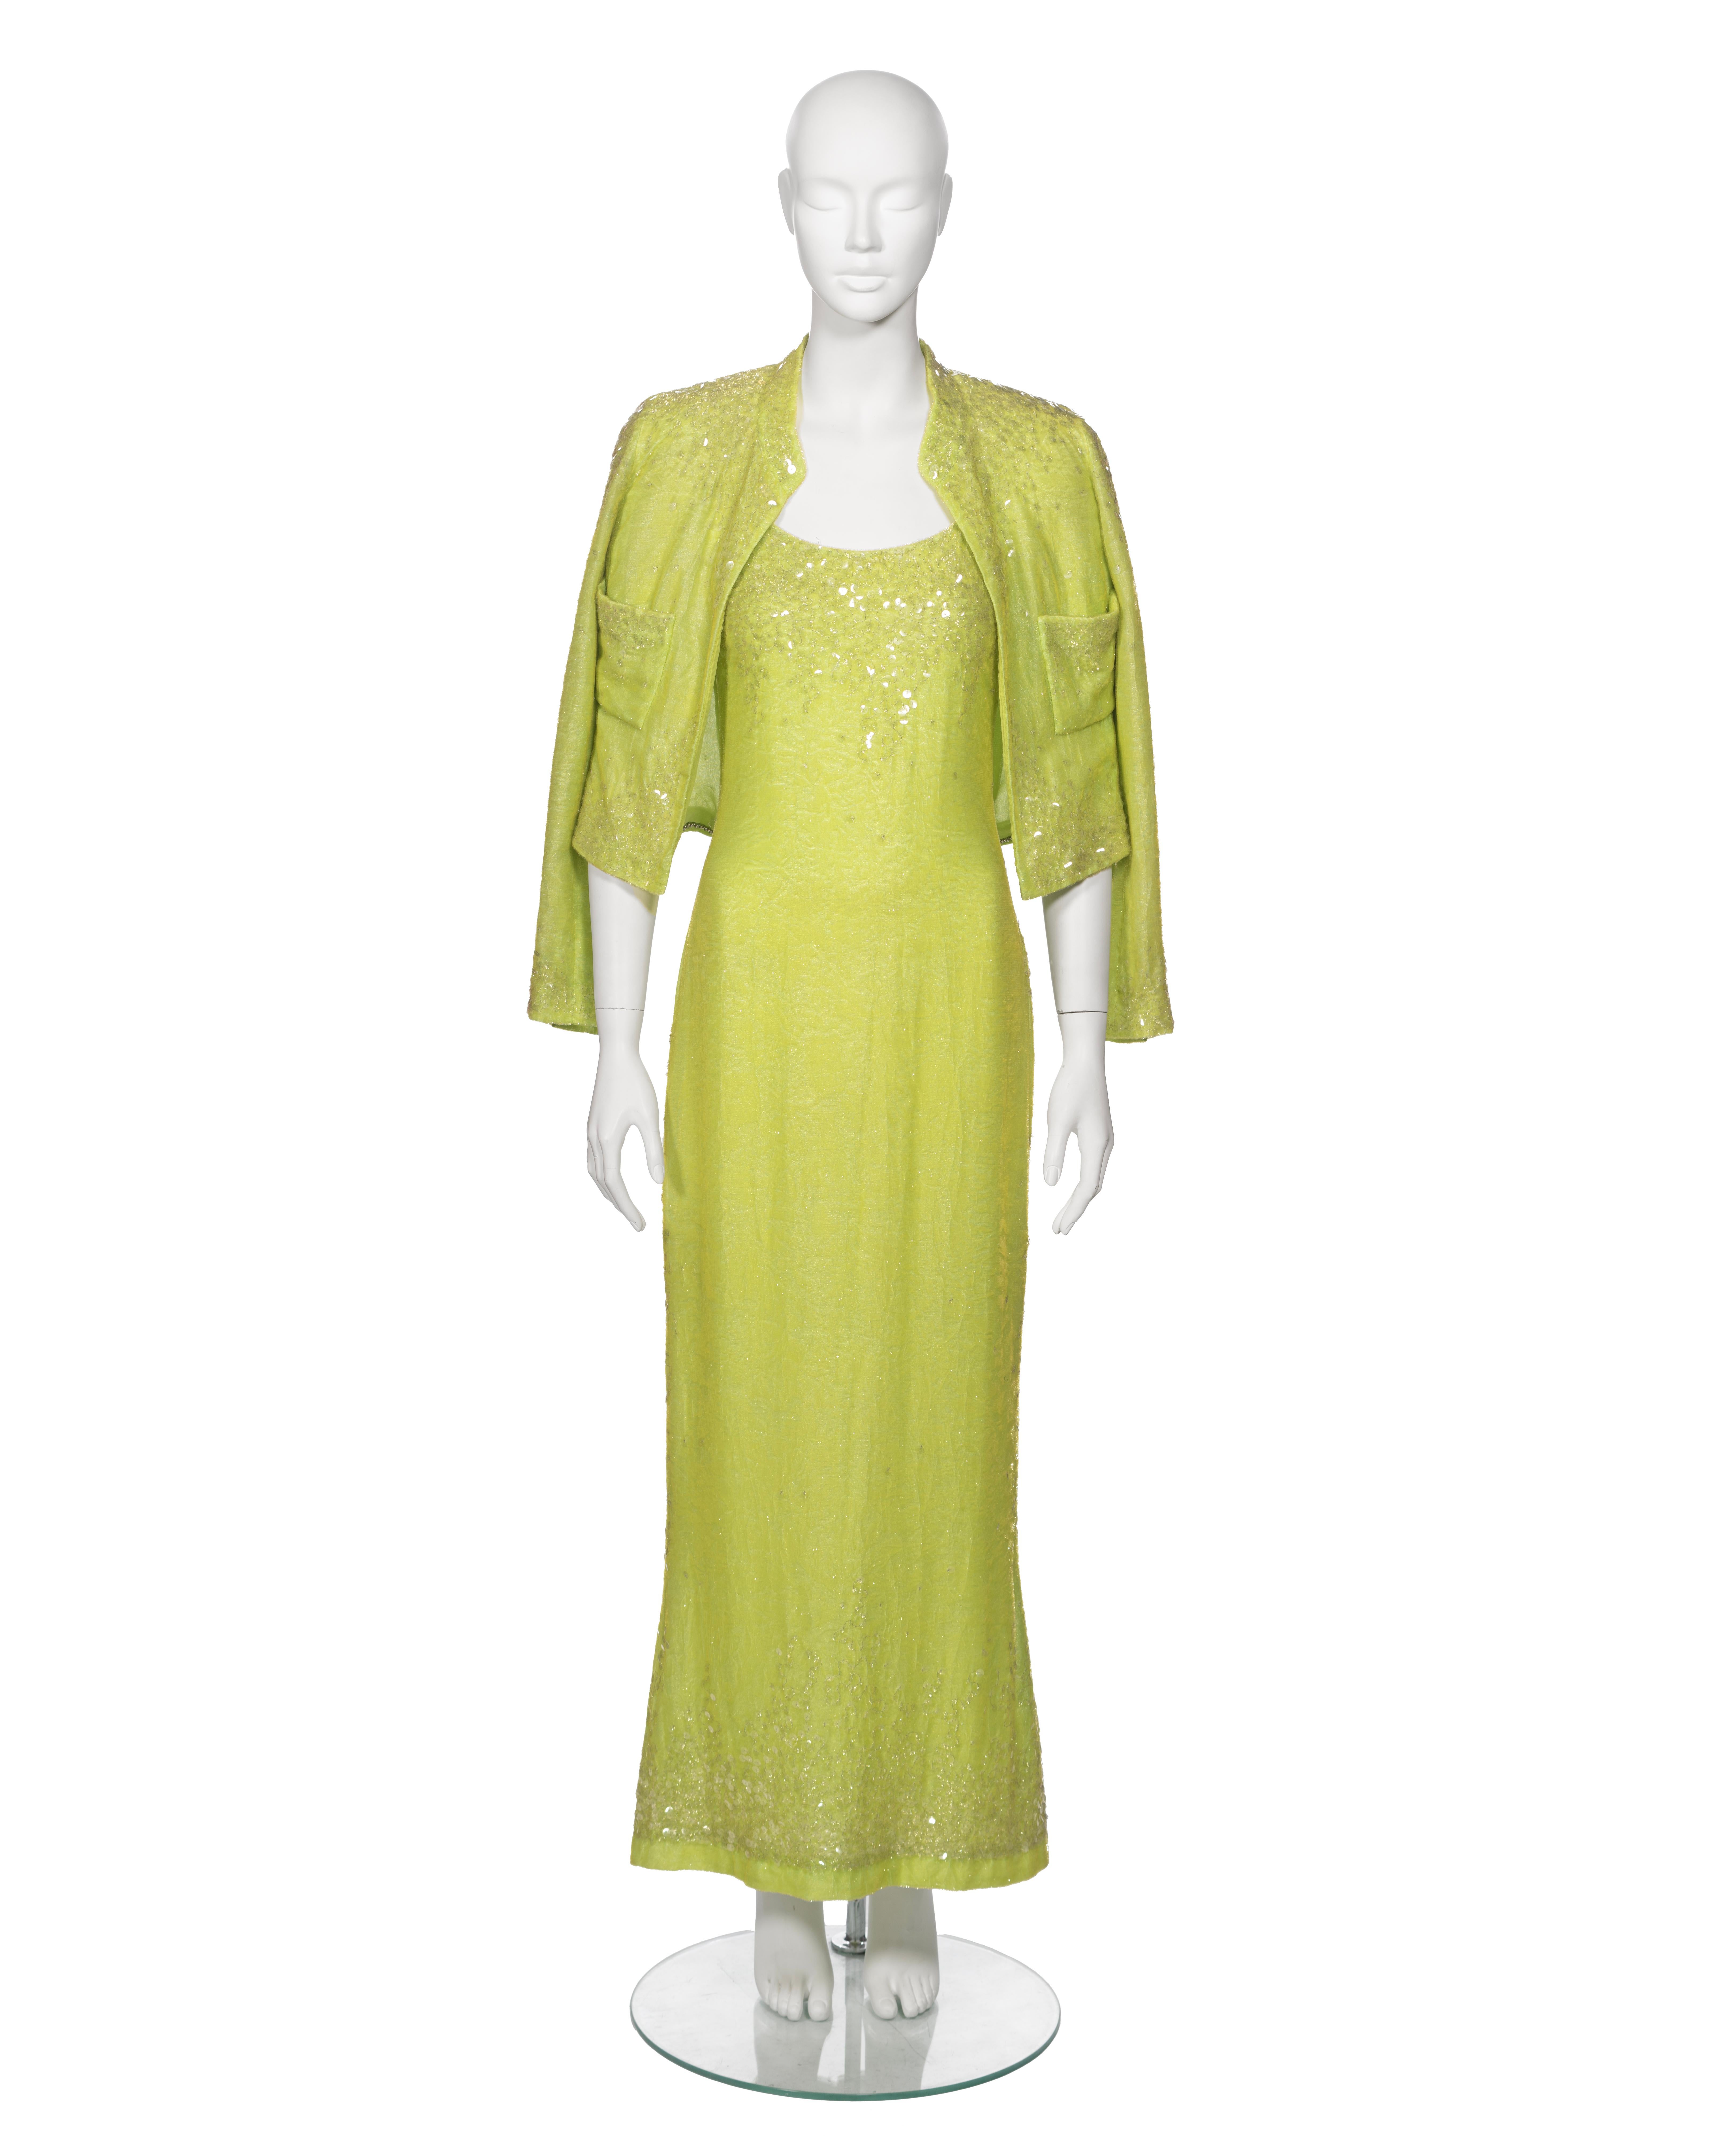 ▪  Archival Chanel Evening Ensemble 
▪ Creative Director: Karl Lagerfeld
▪ Spring-Summer 1997
▪ Sold by One of a Kind Archive 
▪ Exquisitely crafted from plush lime green velvet, adorned with clear sequins 
▪ Maxi dress features a flattering scoop